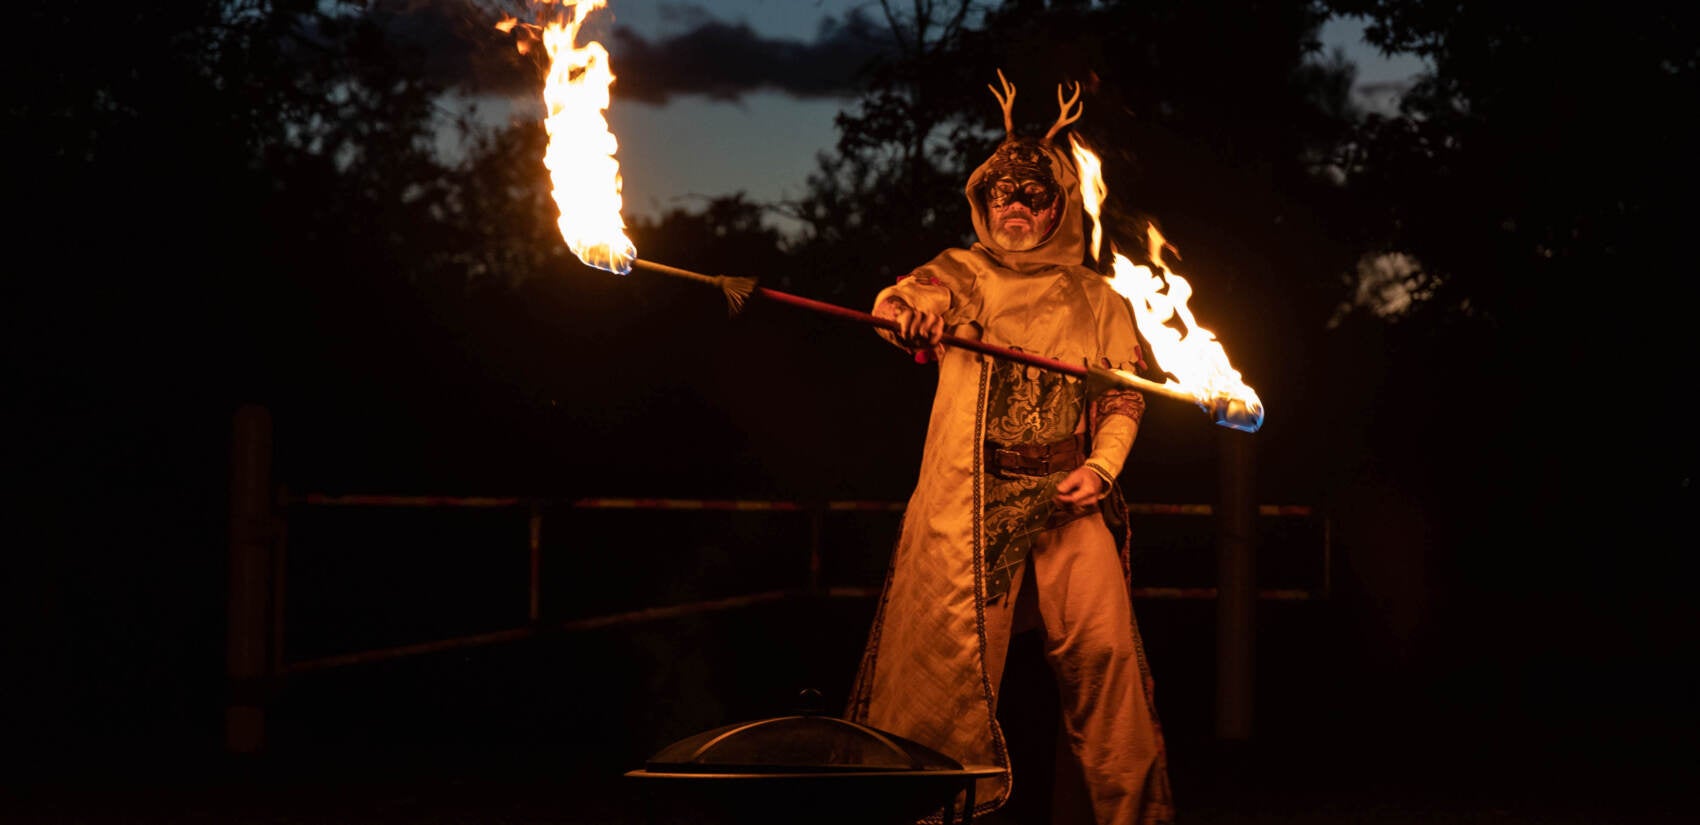 A man in an antler suit performs fire-spinning, with the last rays of sunlight fading behind him.